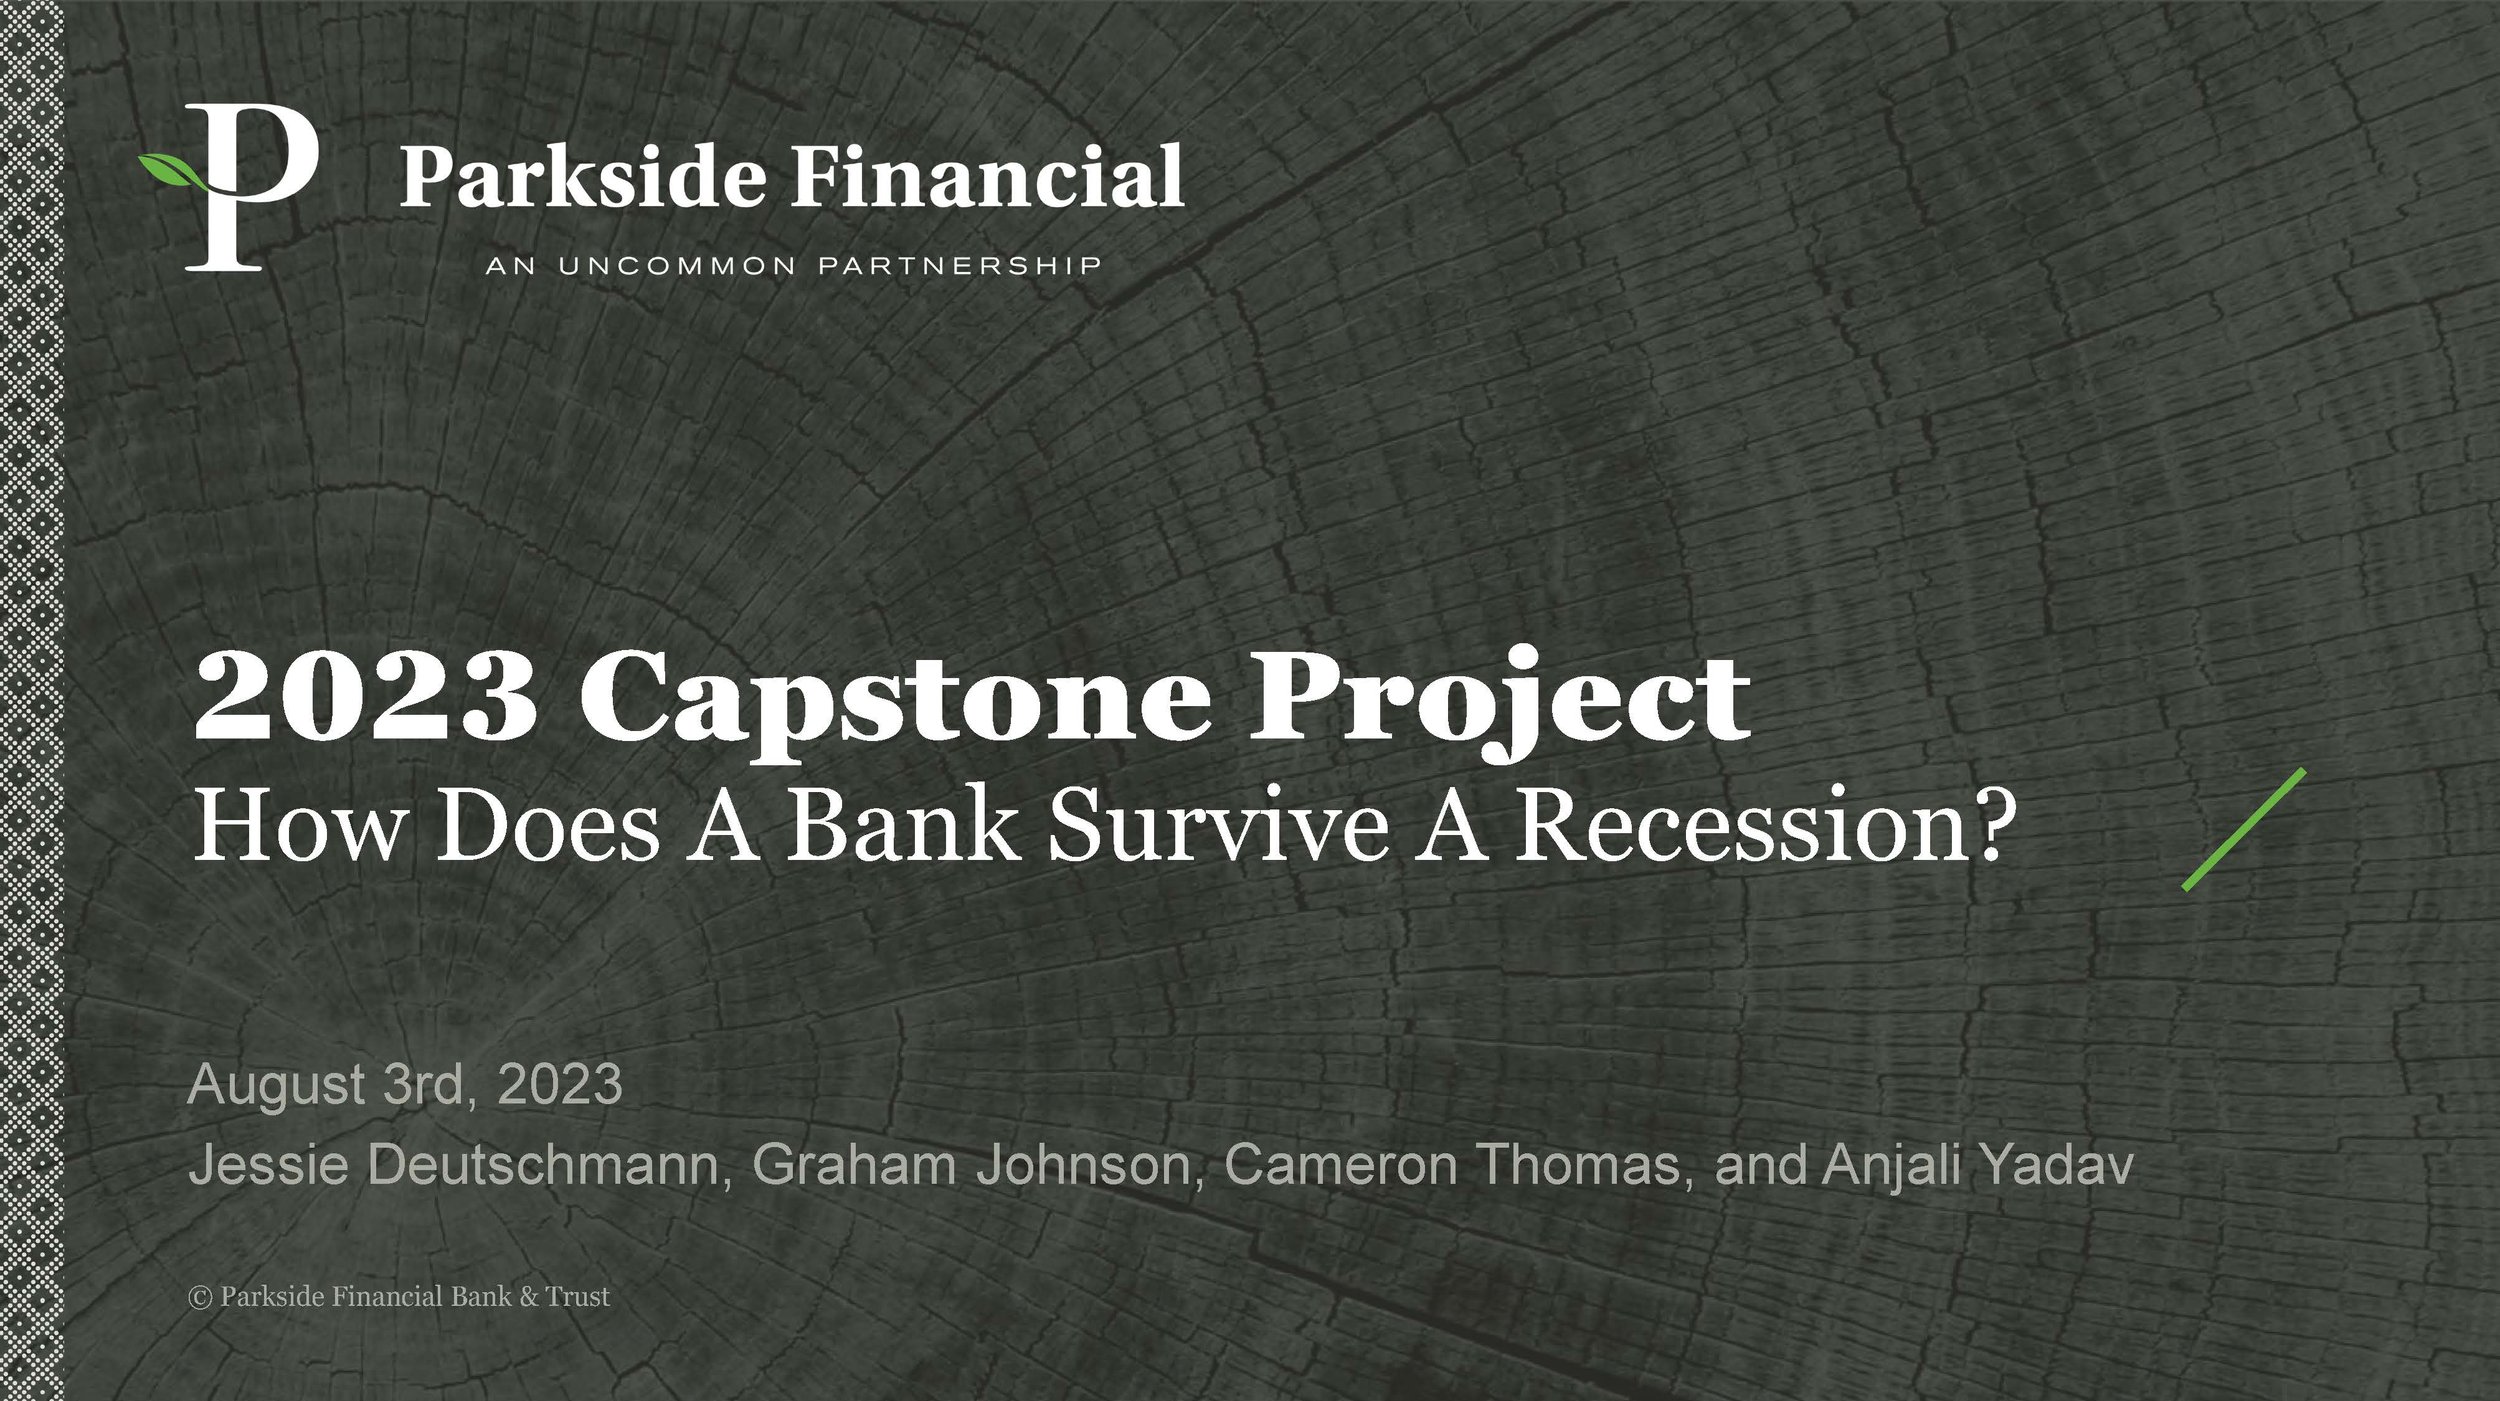 Capstone Project PPT_Page_02.jpg